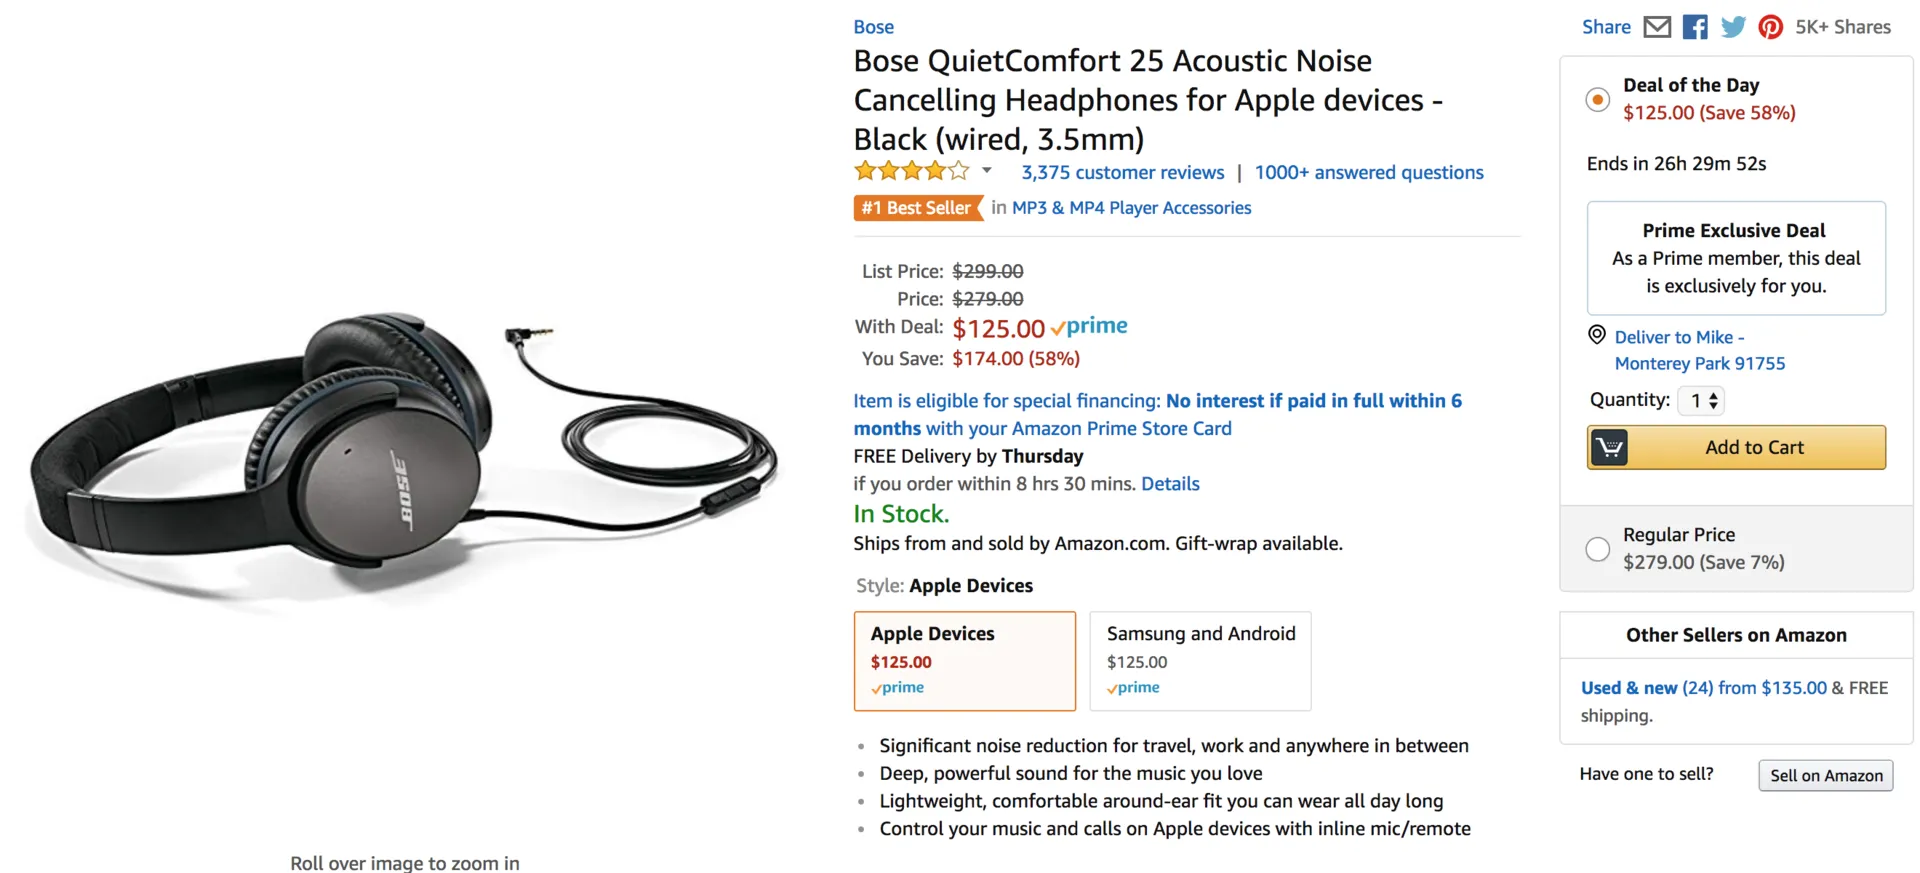 Awesome Deal on Bose Noise Cancellation Headphones